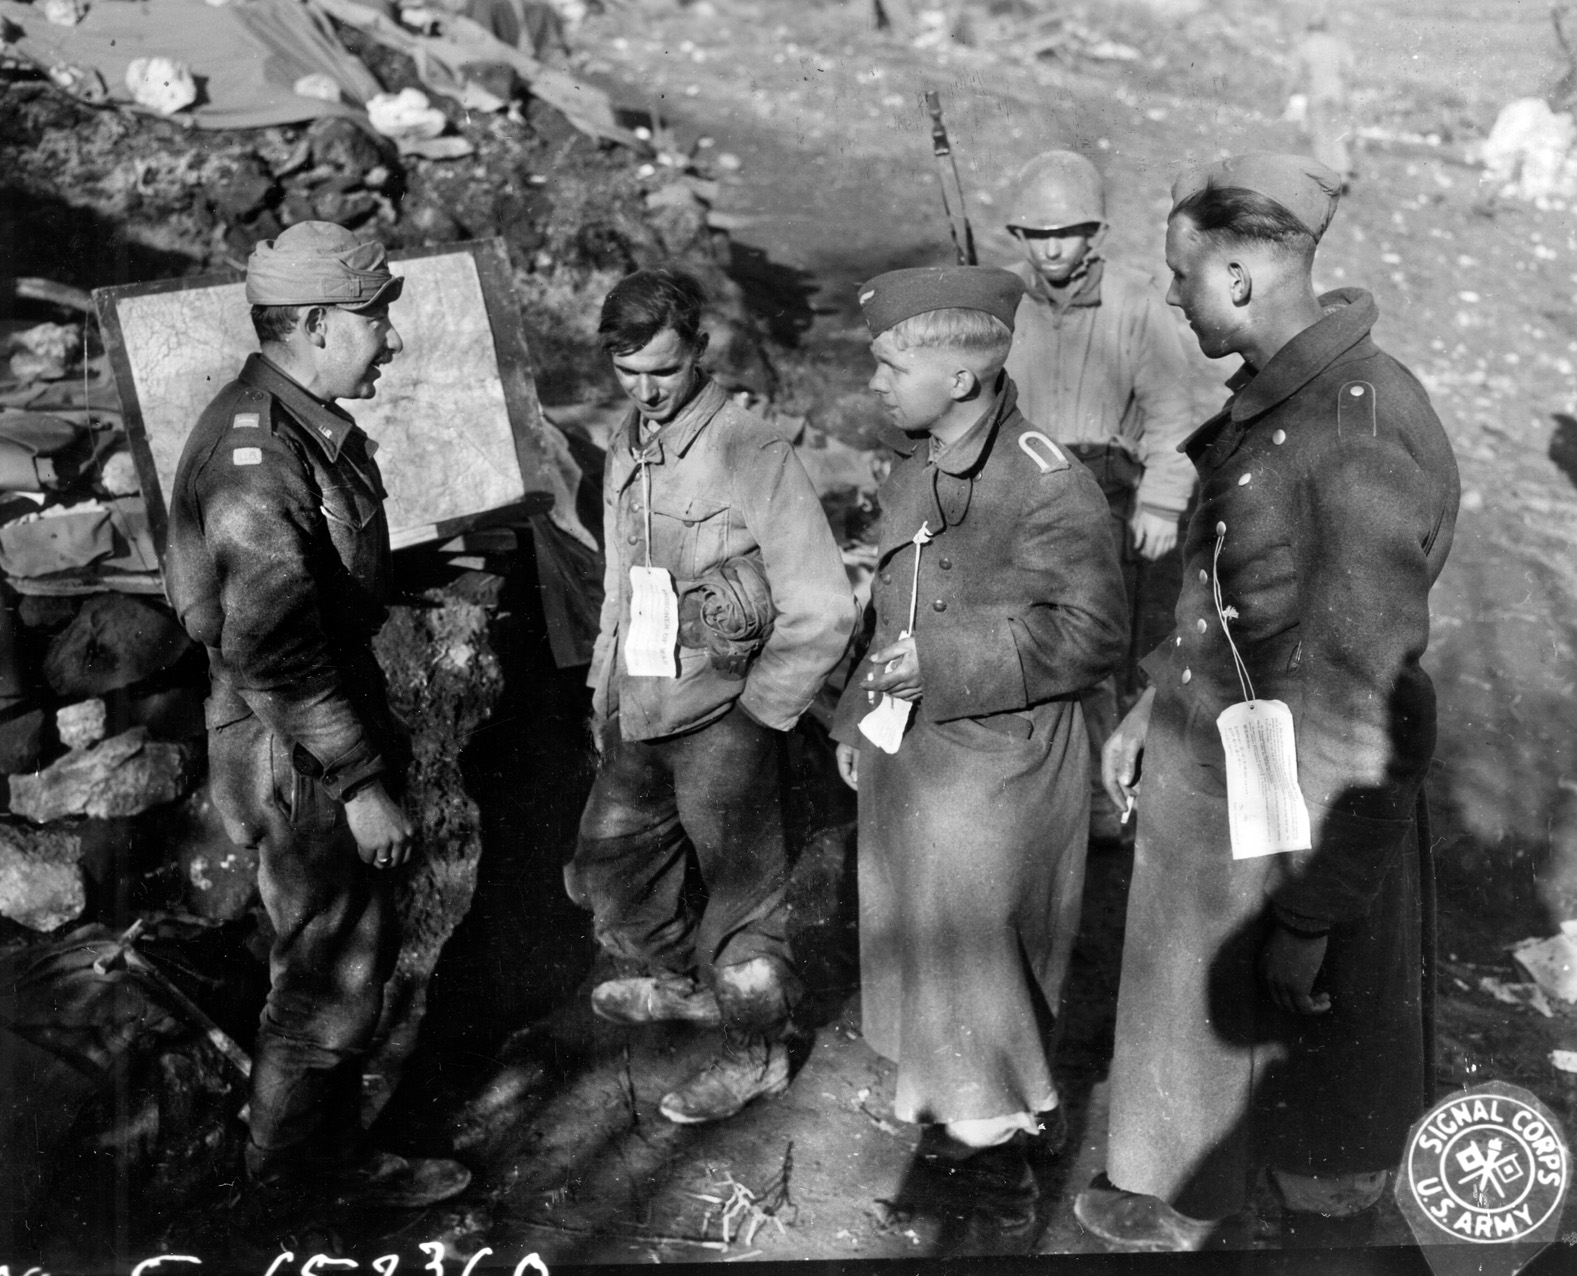 An American officer interrogates young German prisoners from the Hermann Goering Division, recently captured during the fight for Mount Porchia.